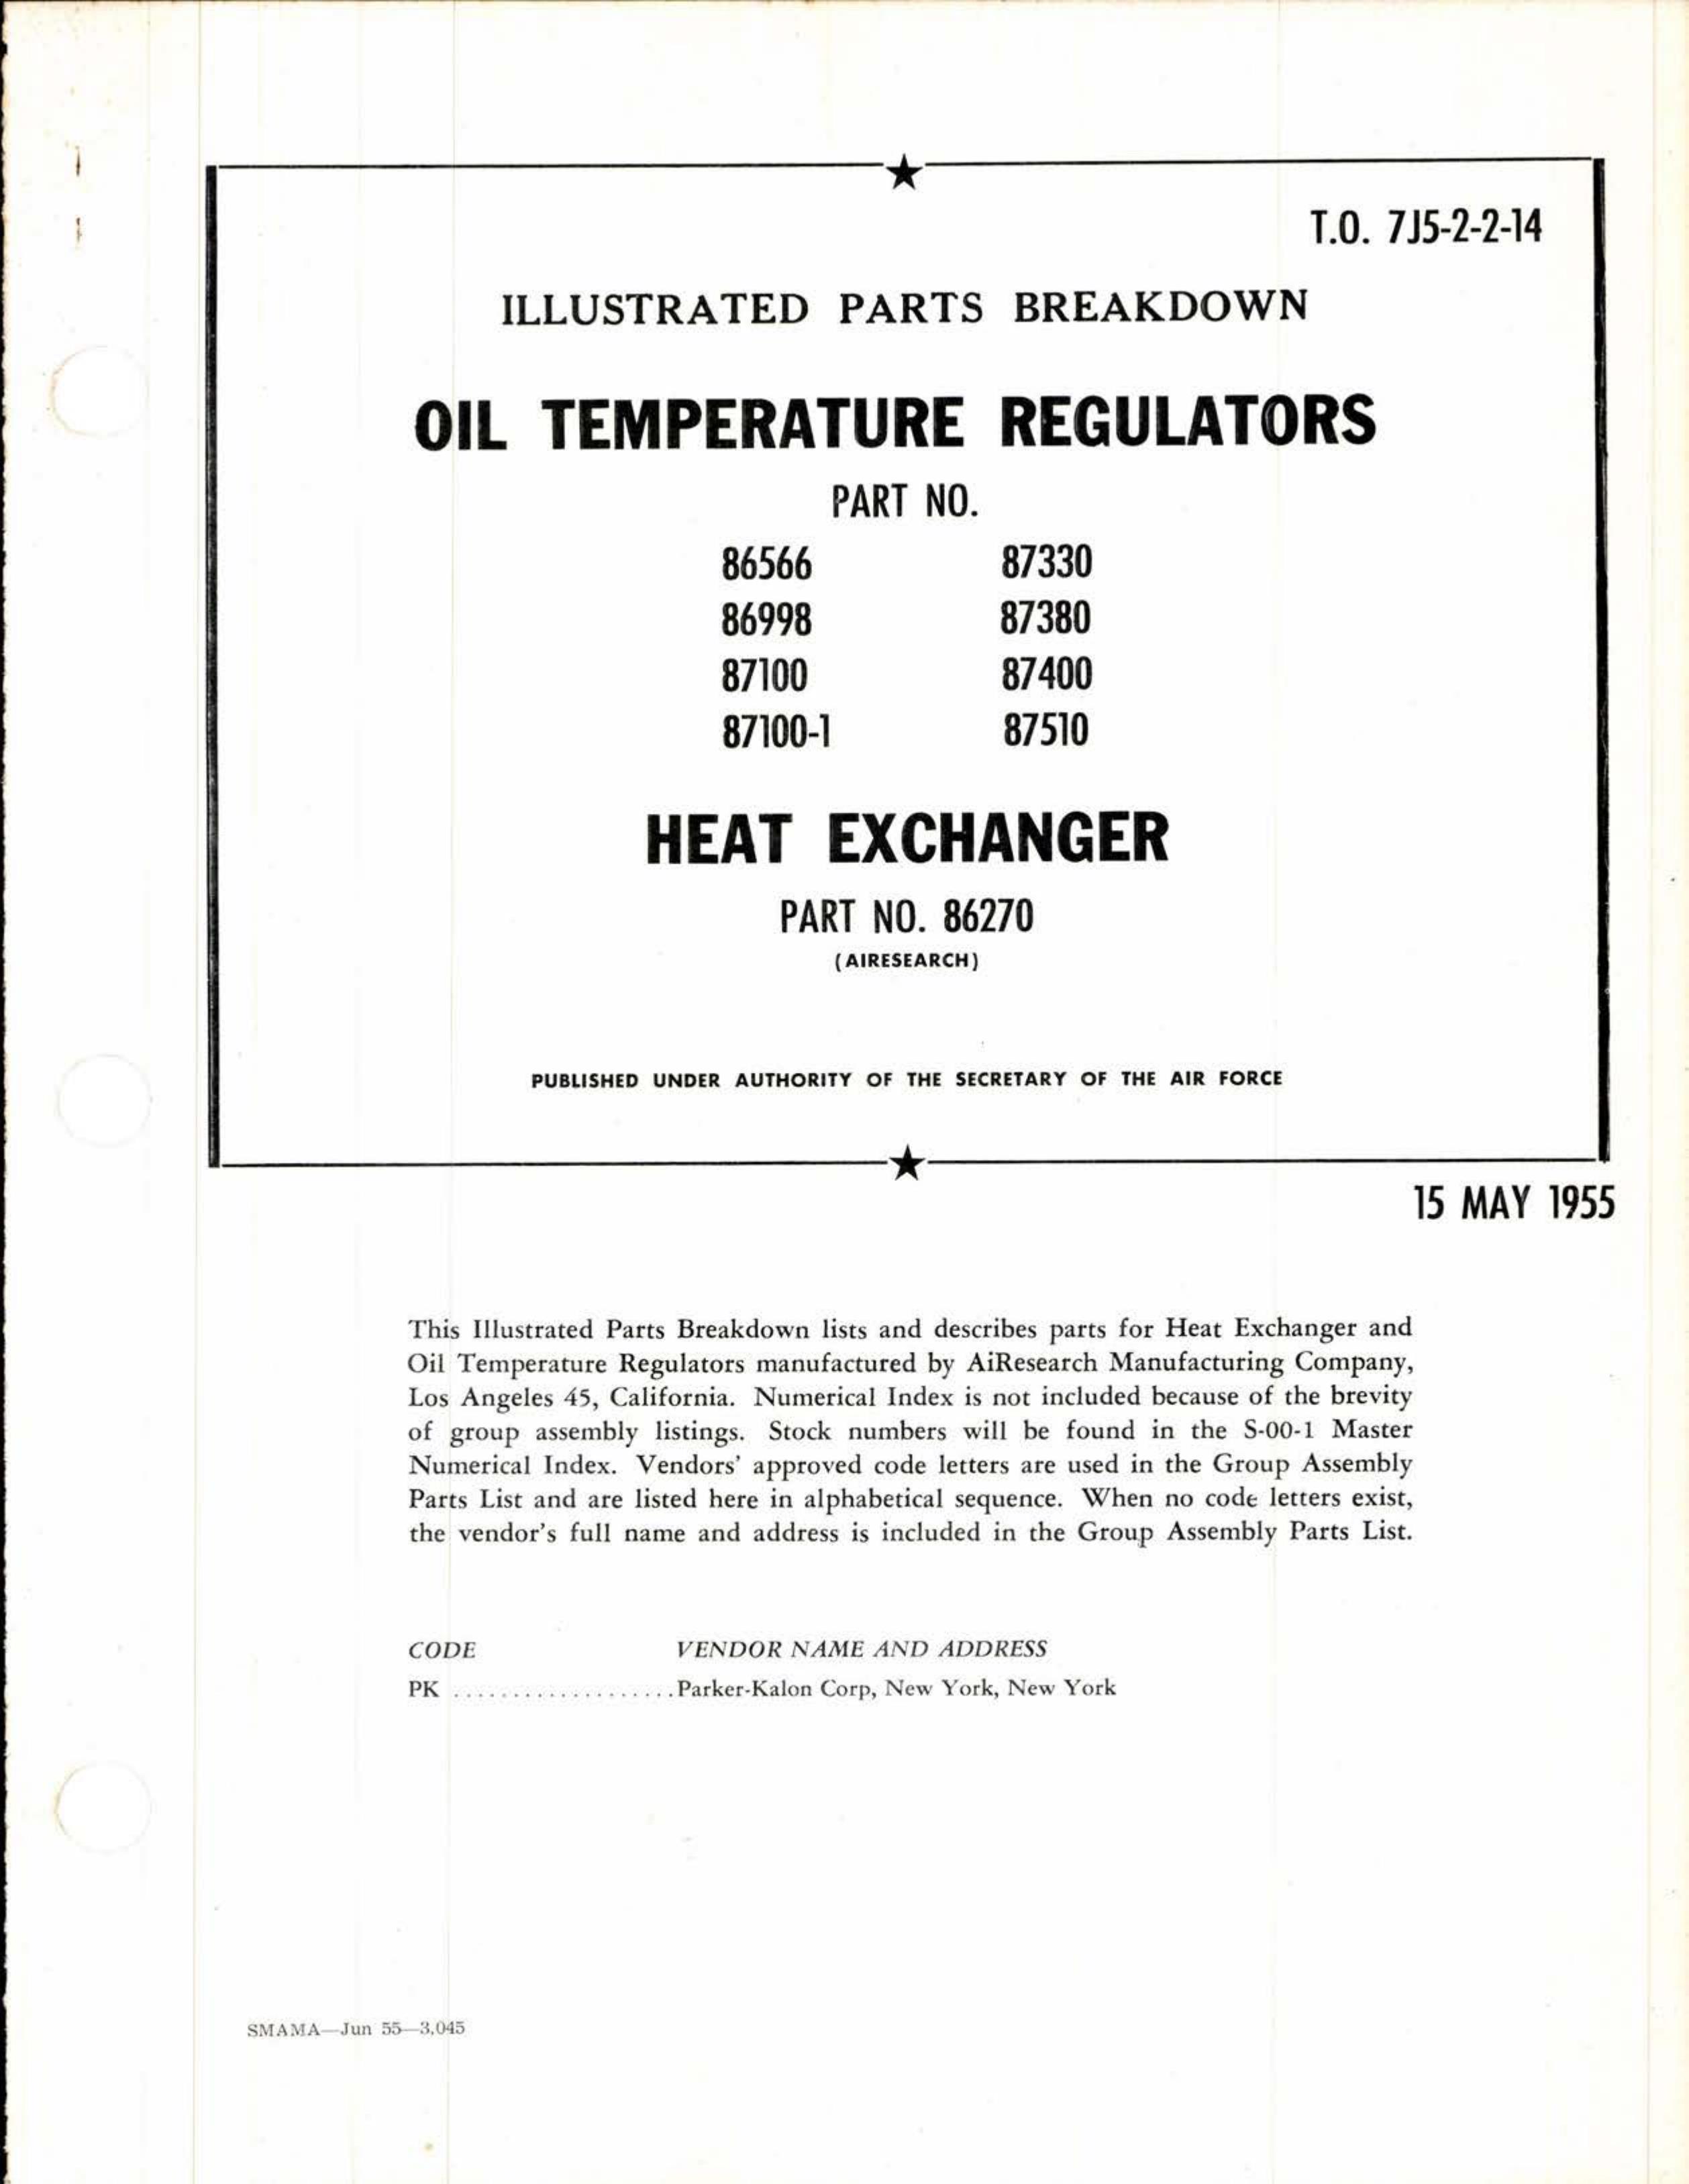 Sample page 1 from AirCorps Library document: Illustrated Parts Breakdown for Oil Temperature Regulators & Heat Exchanger